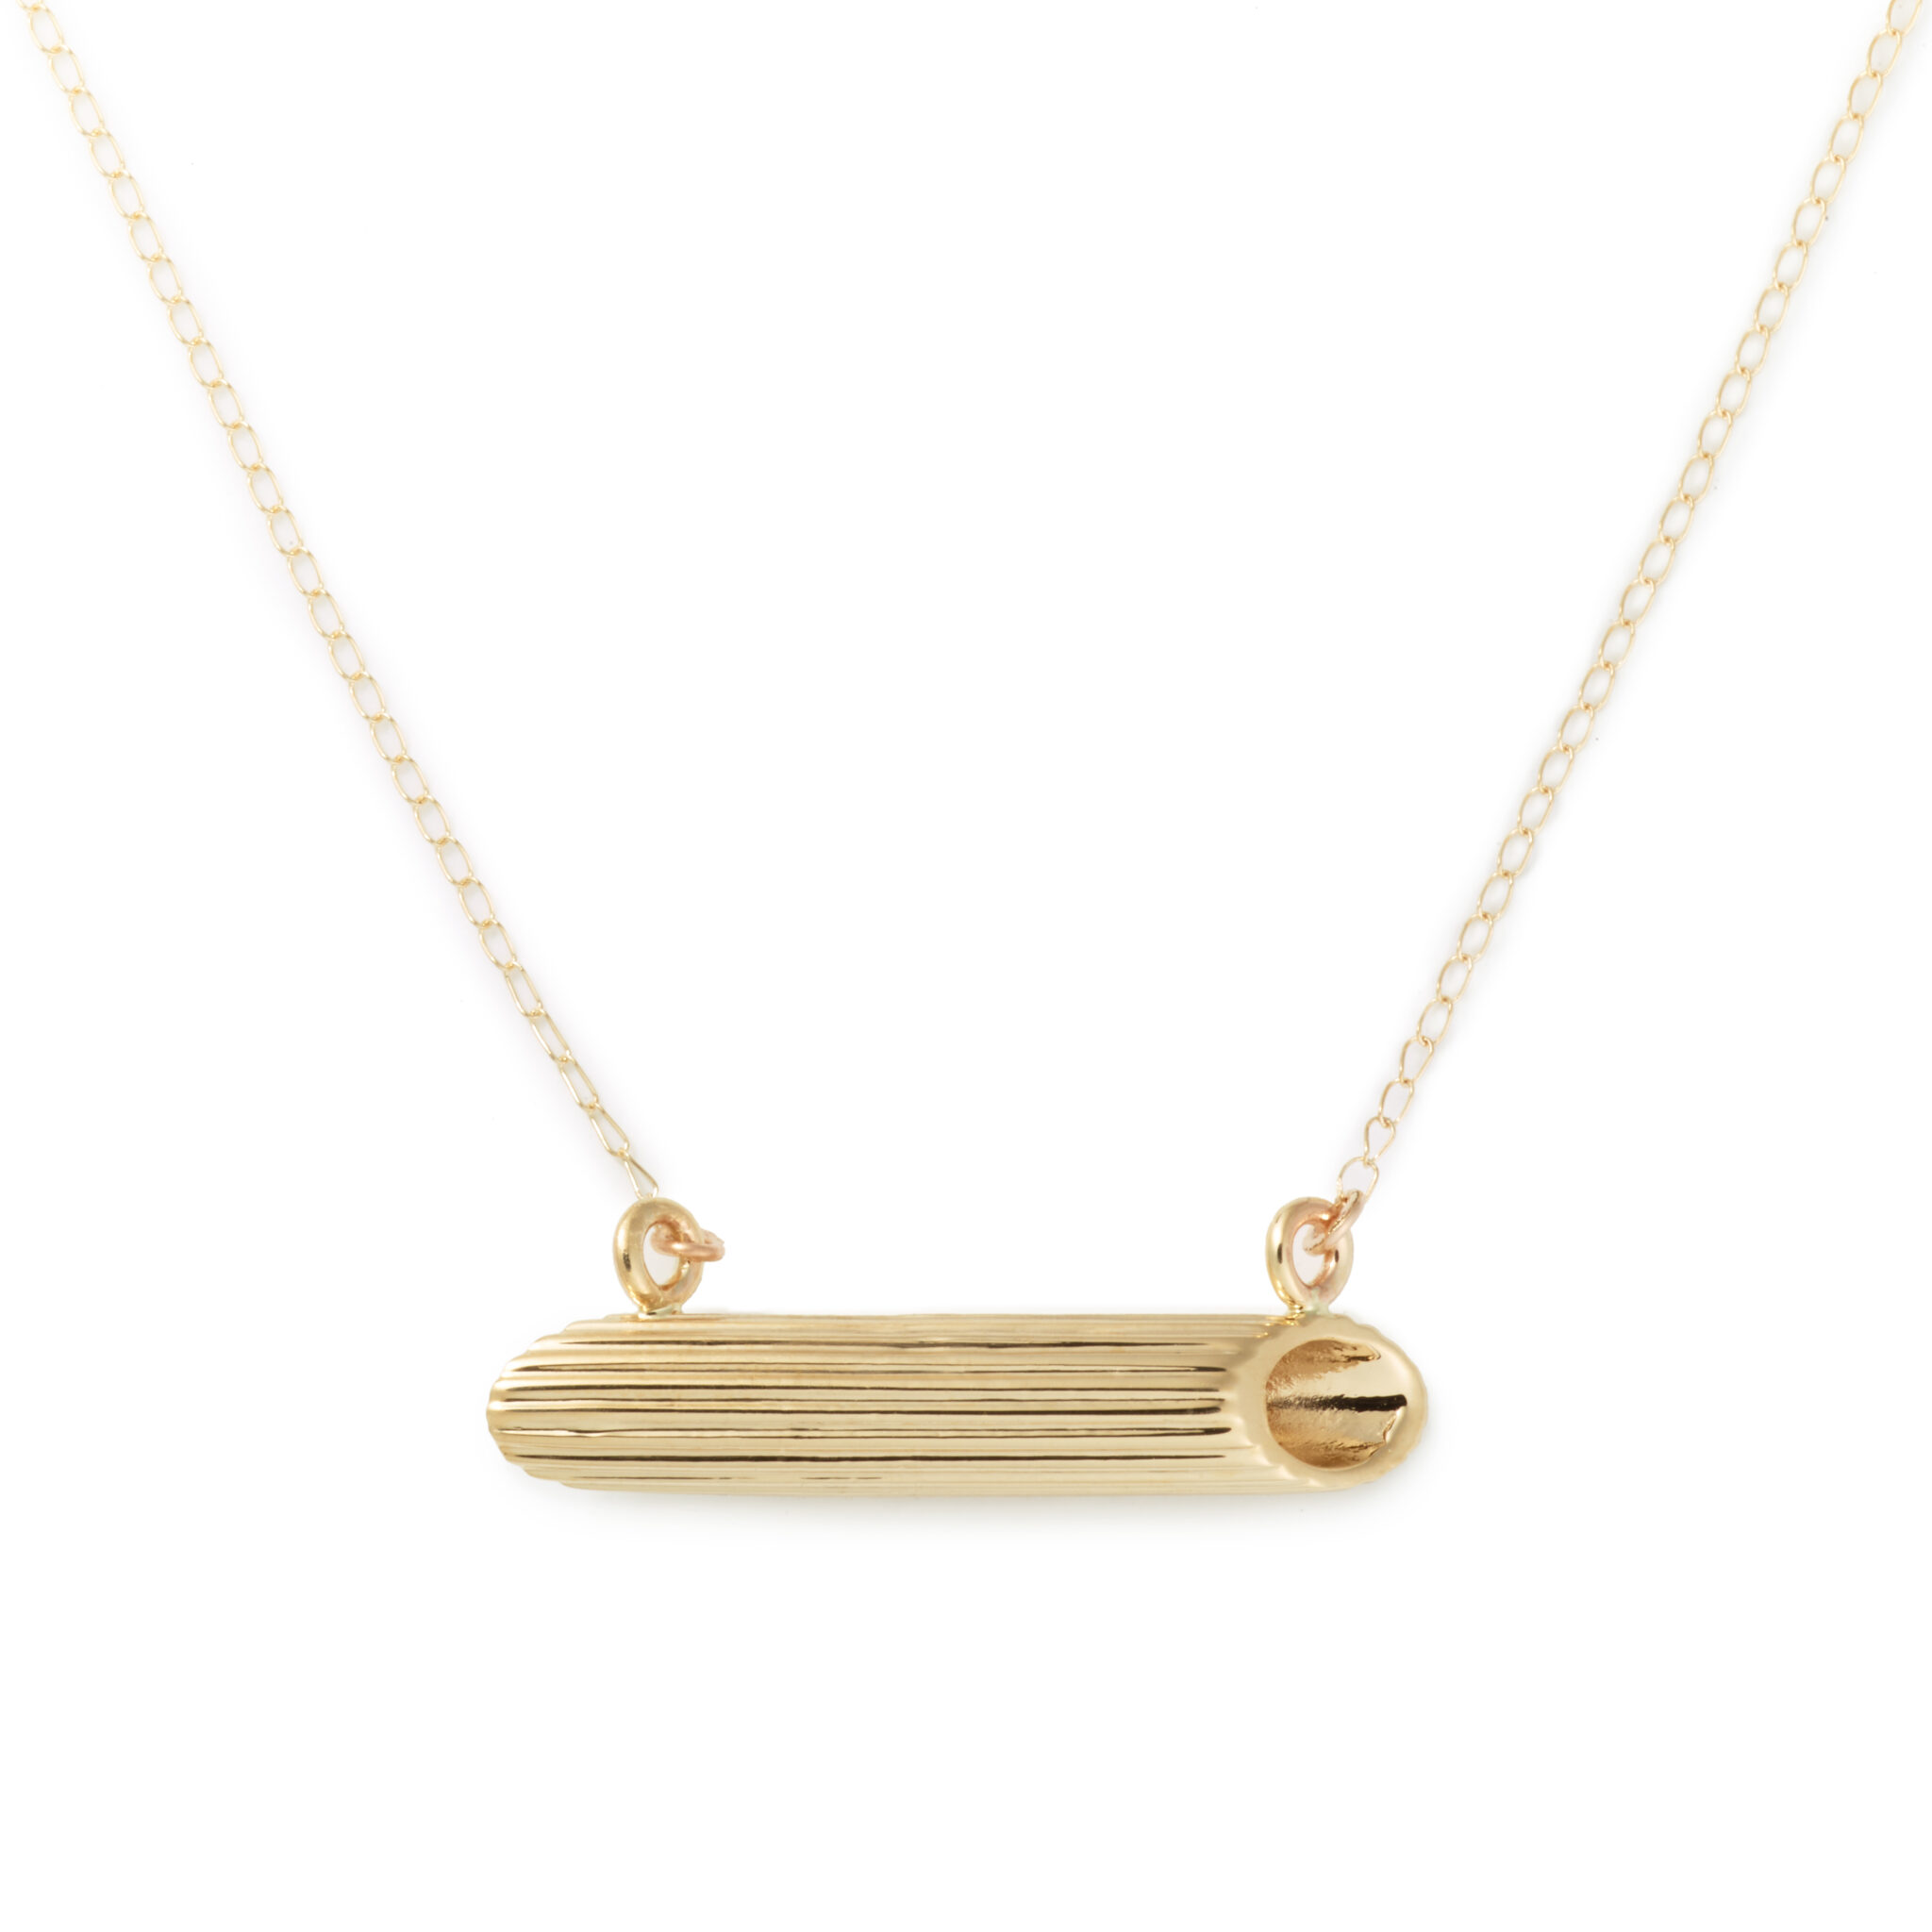 Penne Rigate Necklace, 14K Yellow Gold - Delicacies